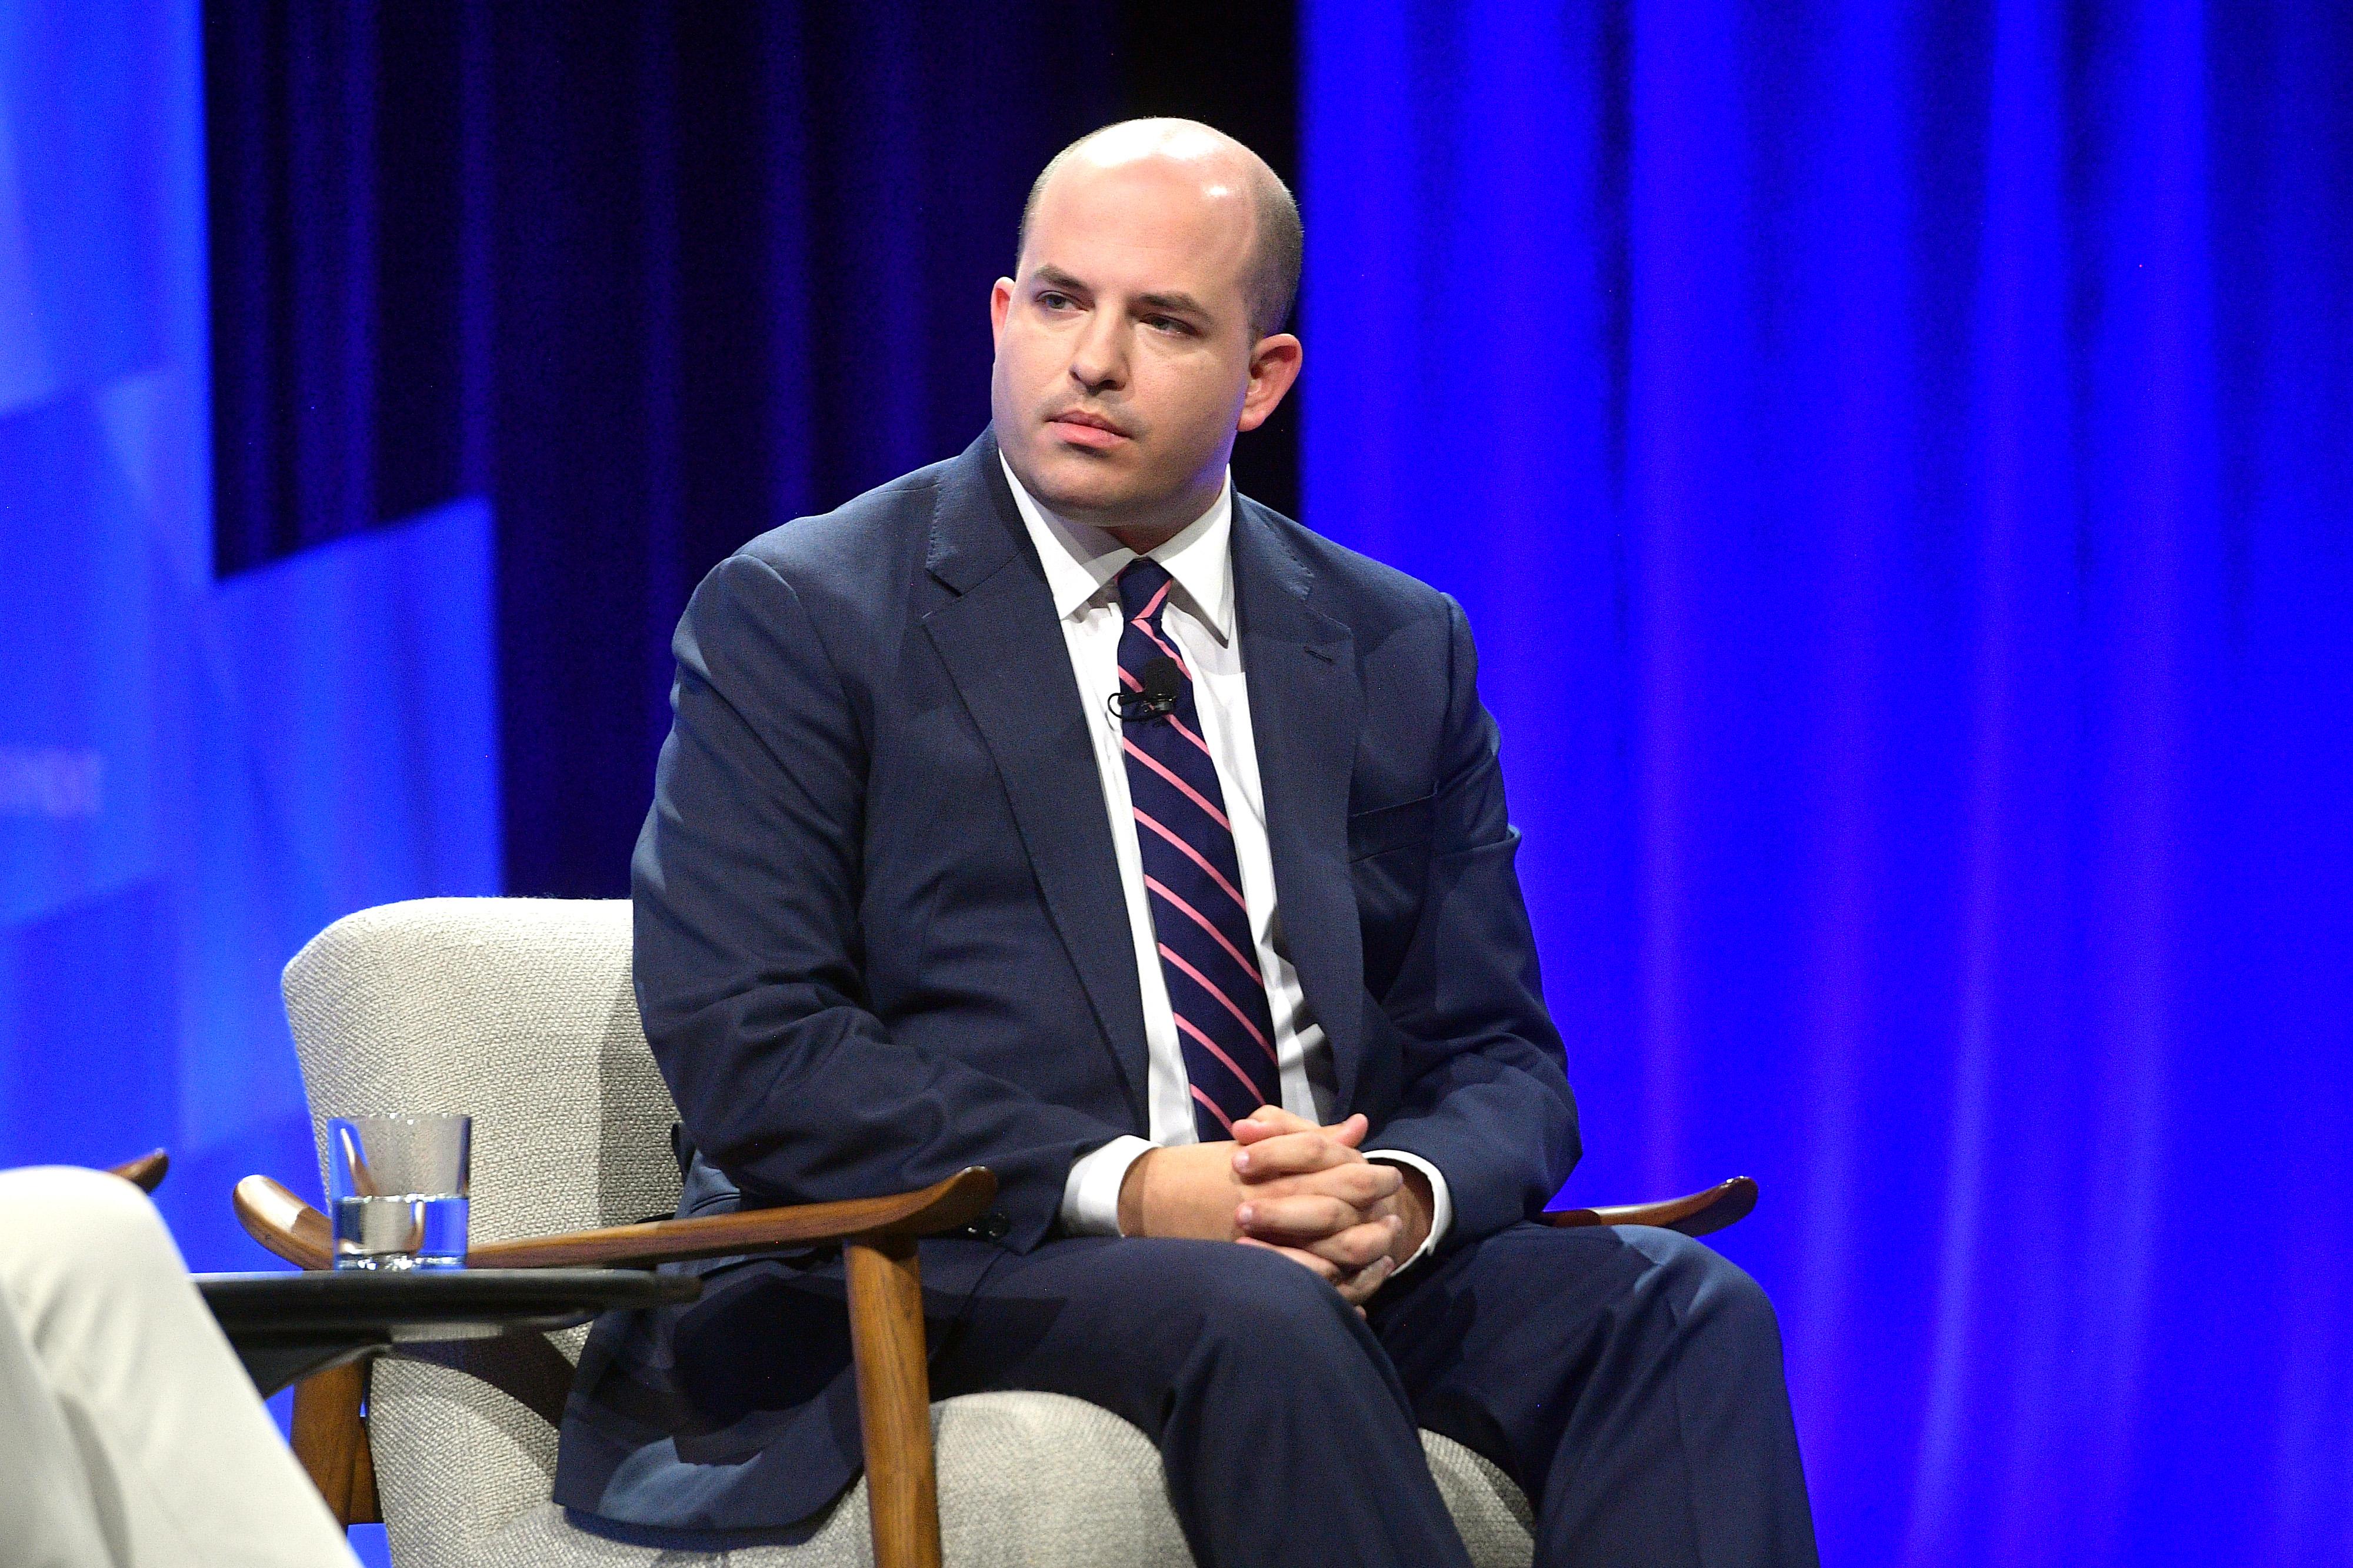 Brian Stelter sitting on a chair onstage next to a table with a glass of water